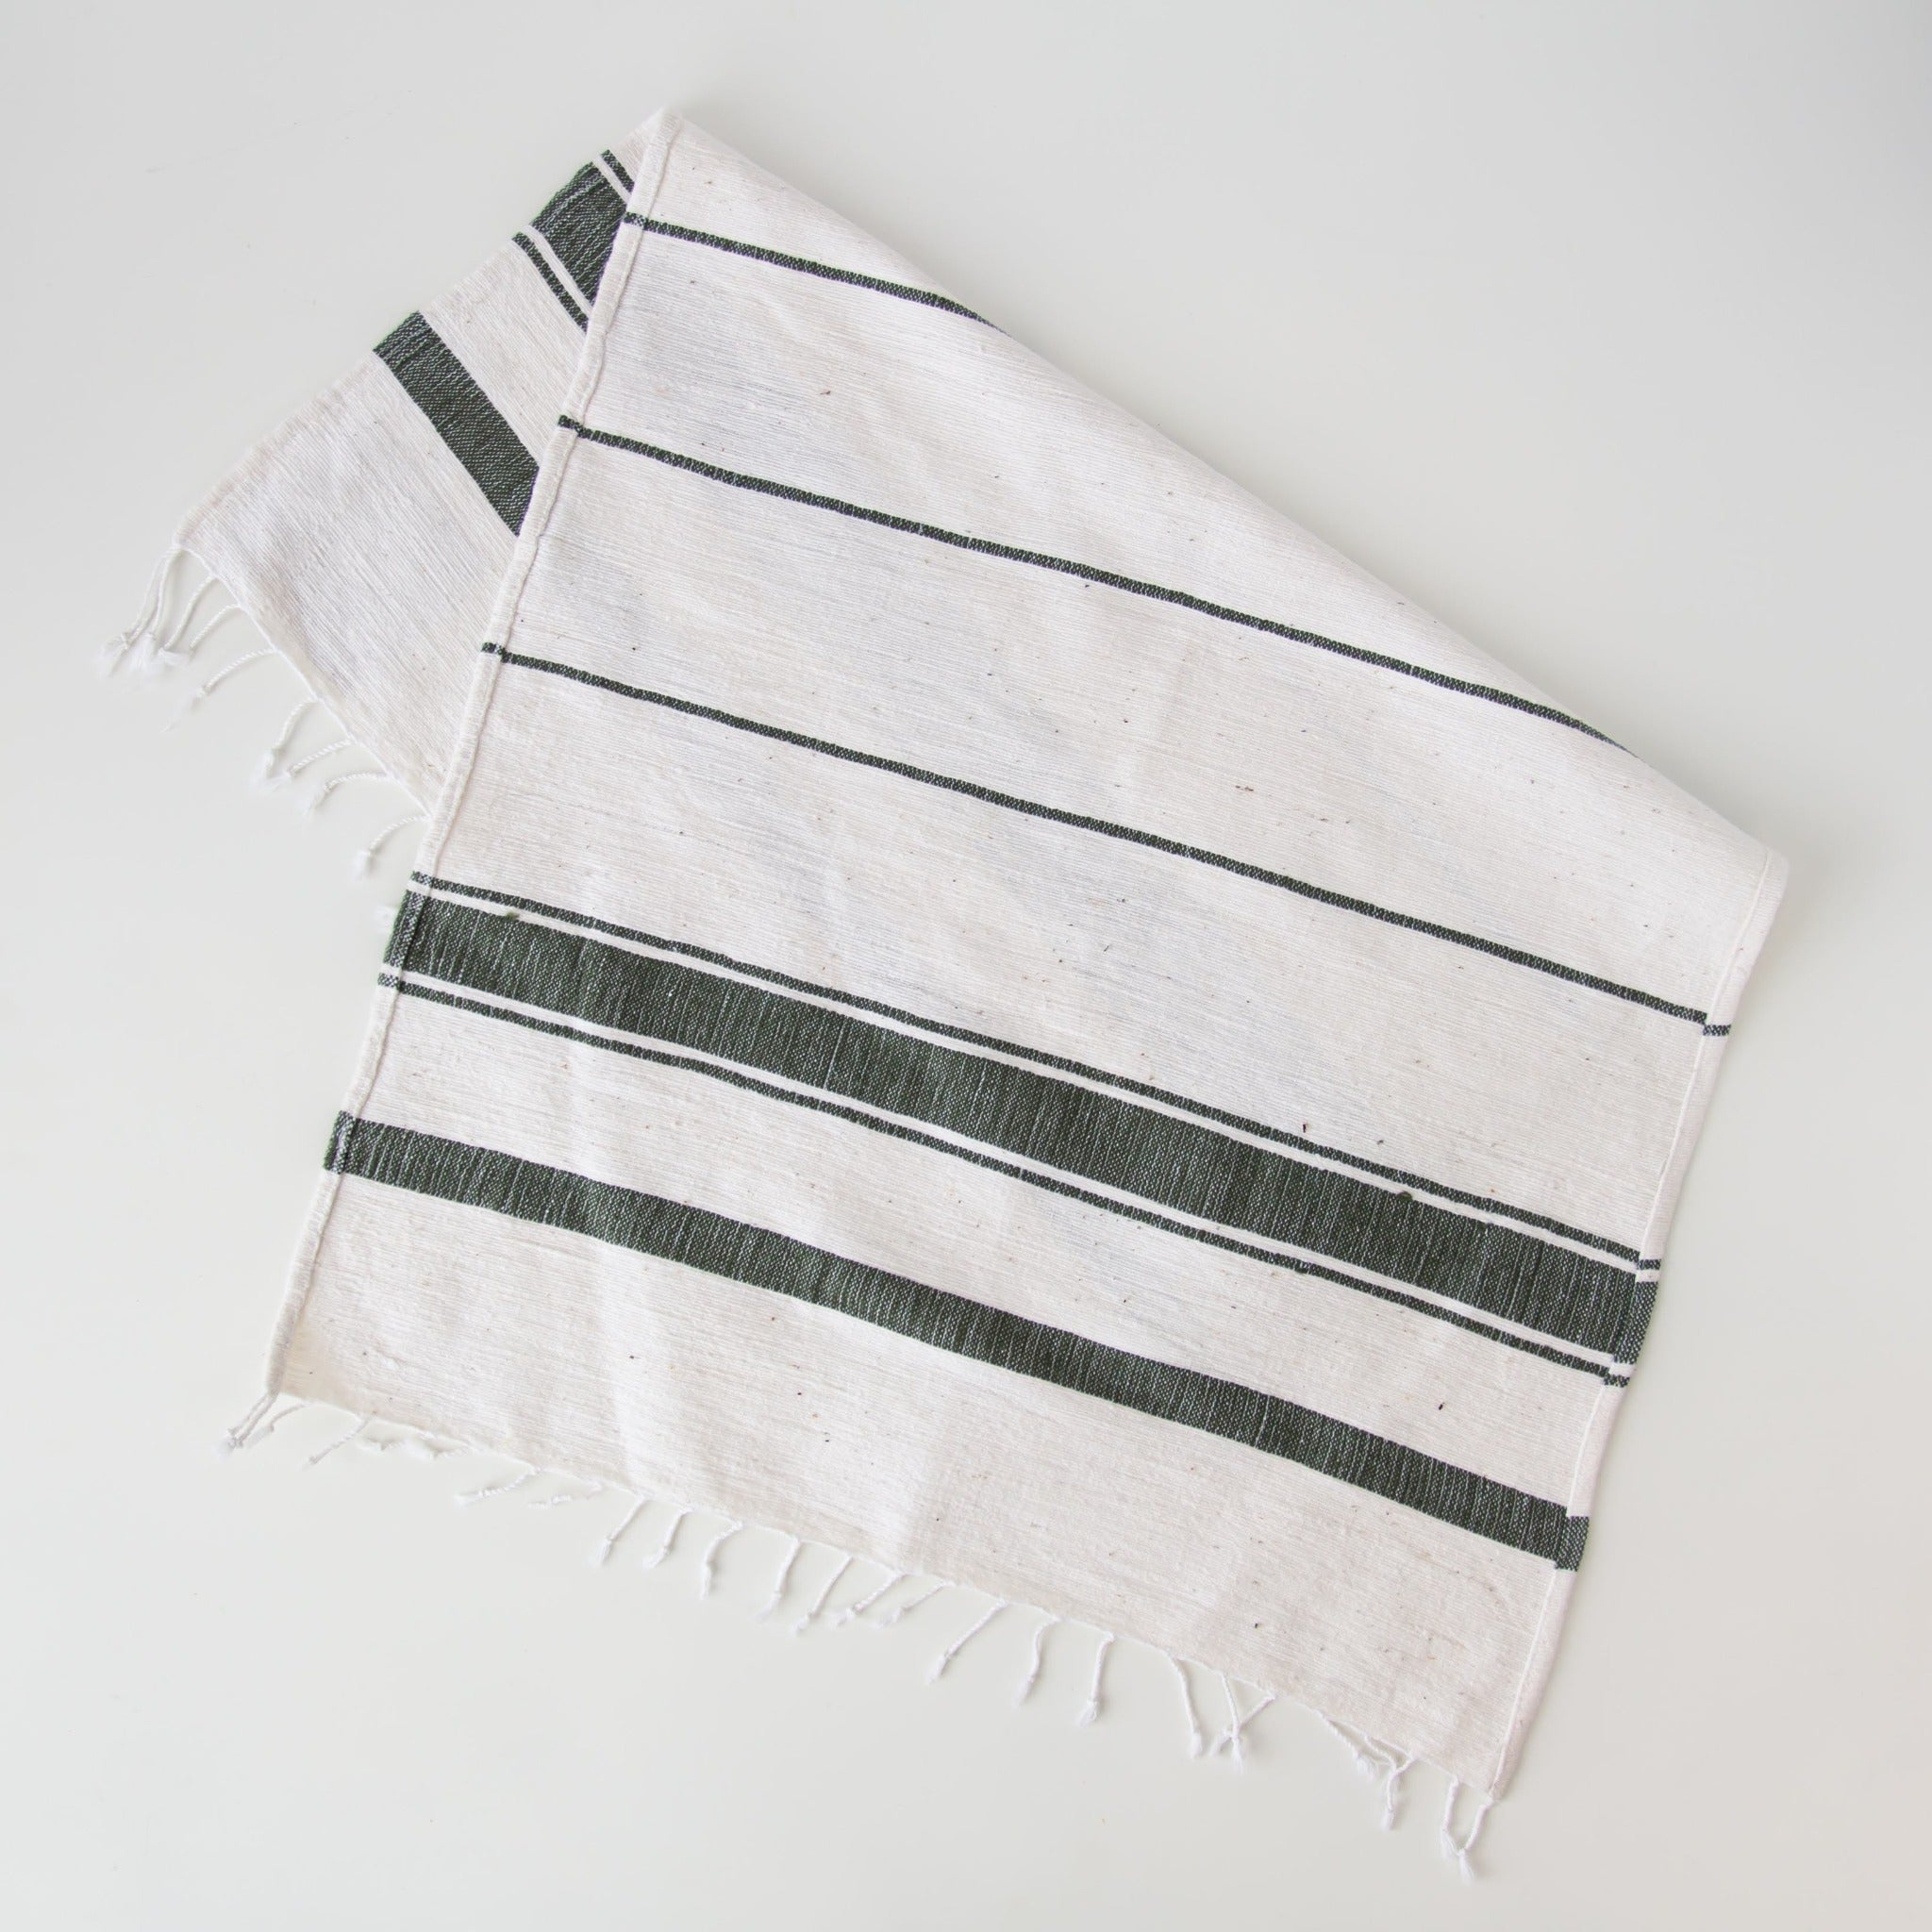 Ethiopian Woven Dish Towel - hand-crafted in Ethiopia using African fabrics and materials